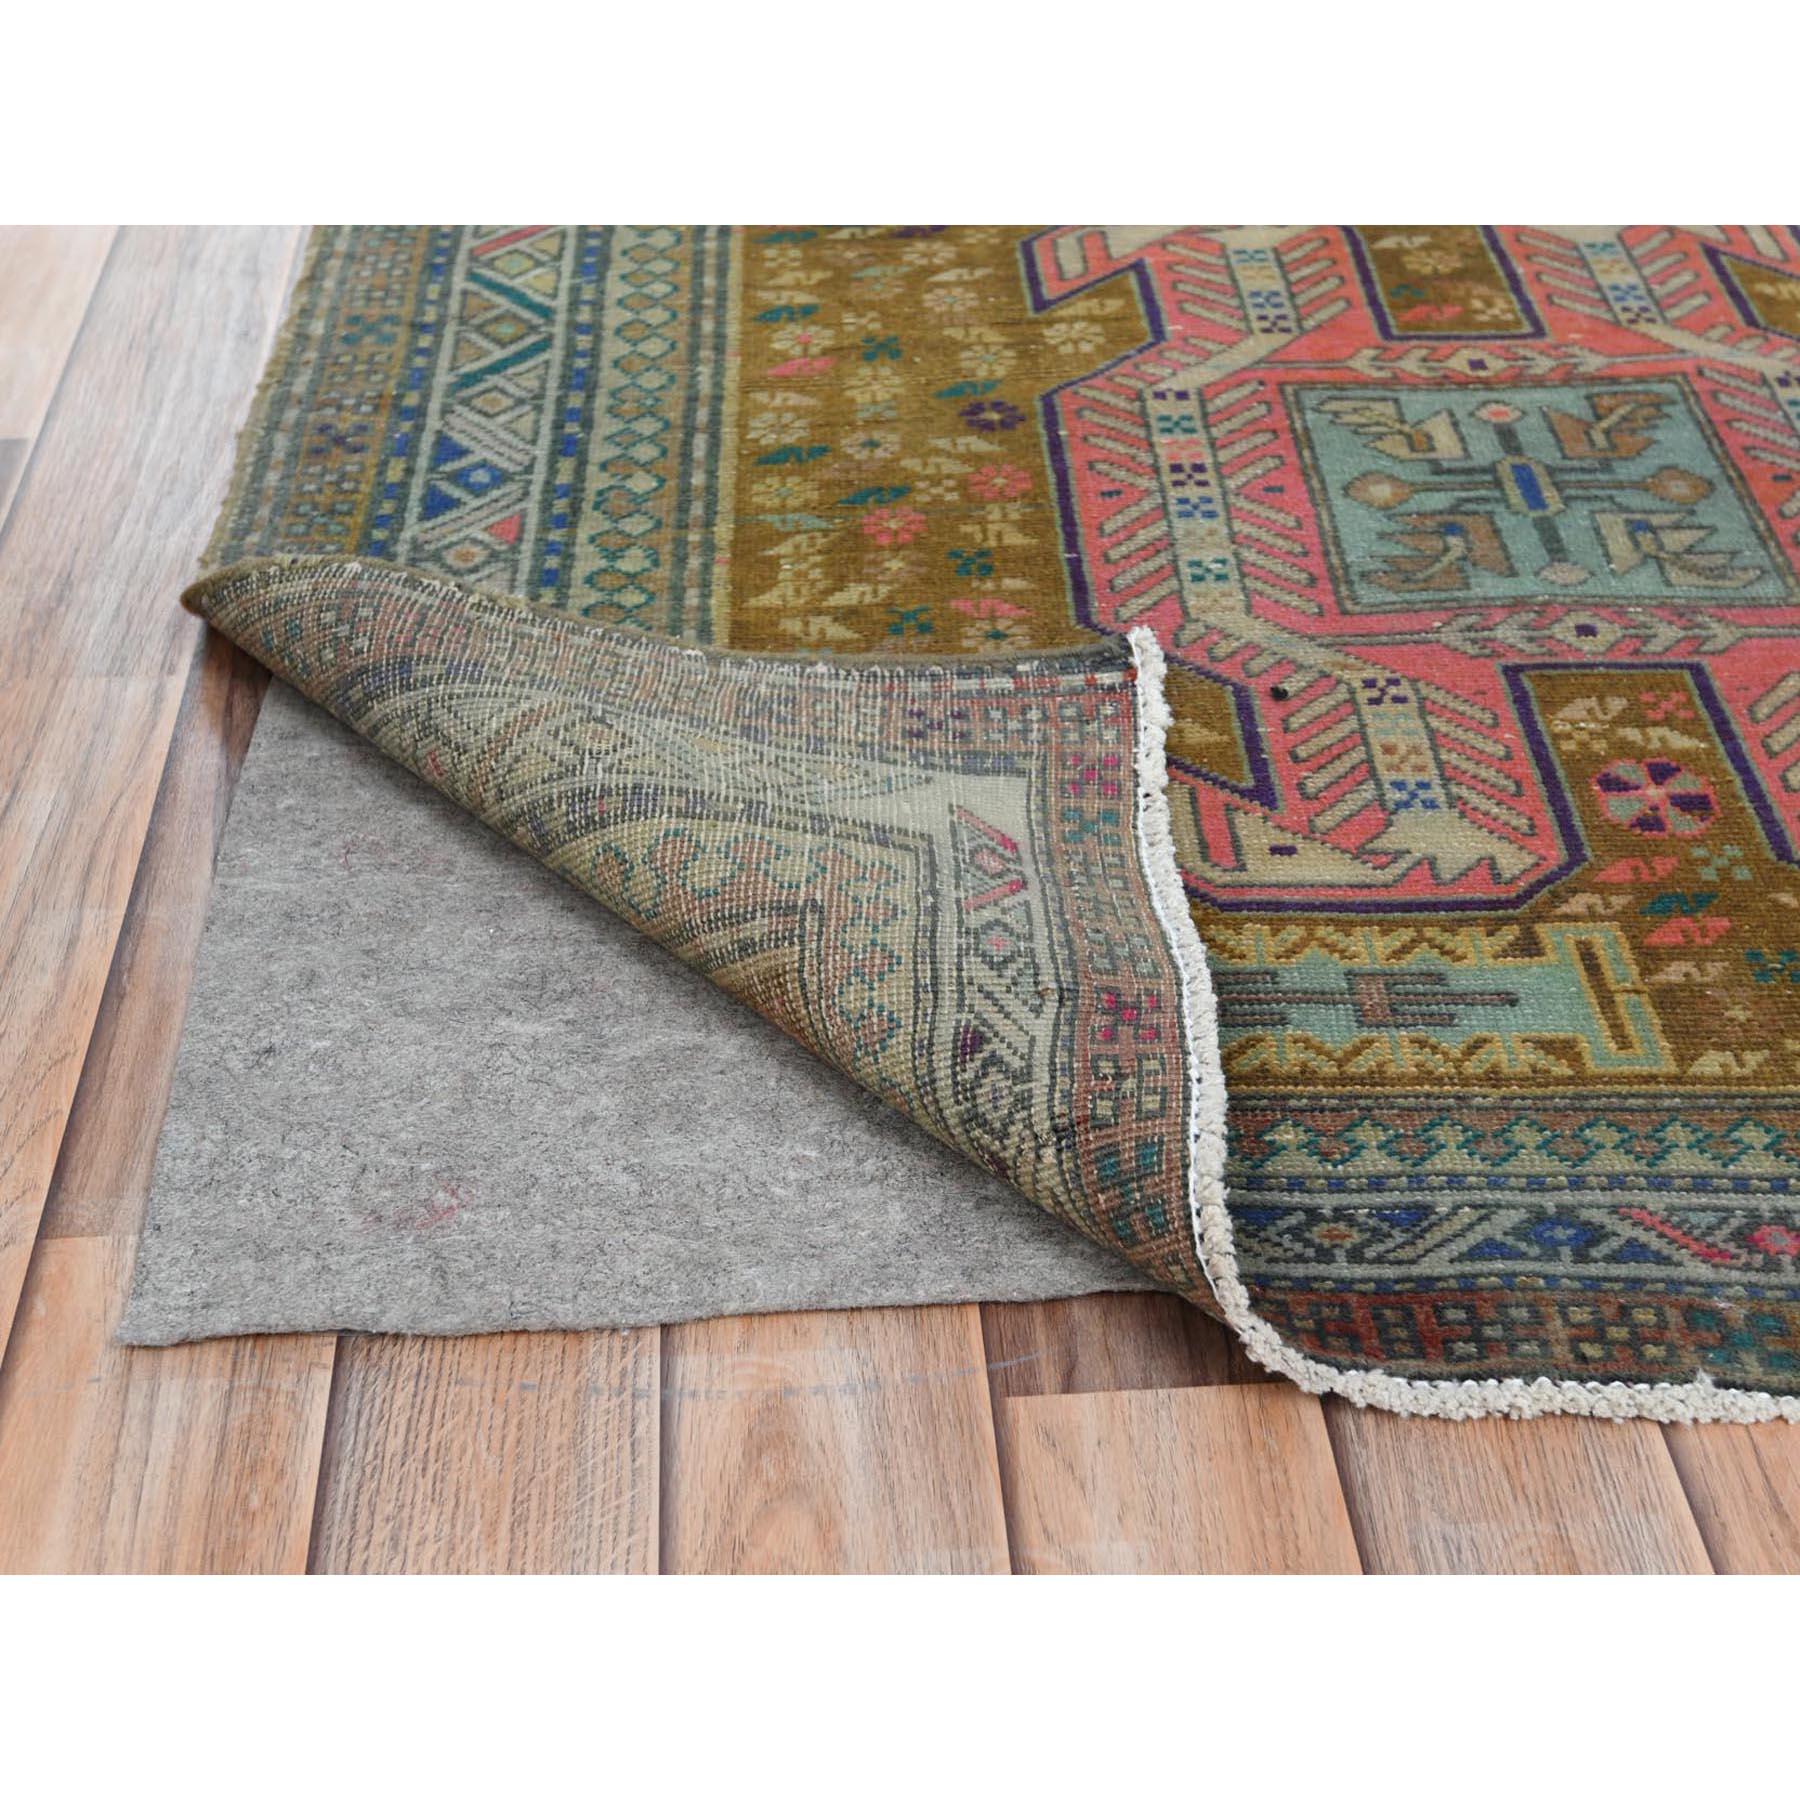 Medieval Gold Color, Distressed Look Worn Wool Hand Knotted Vintage Northwest Persian Rug